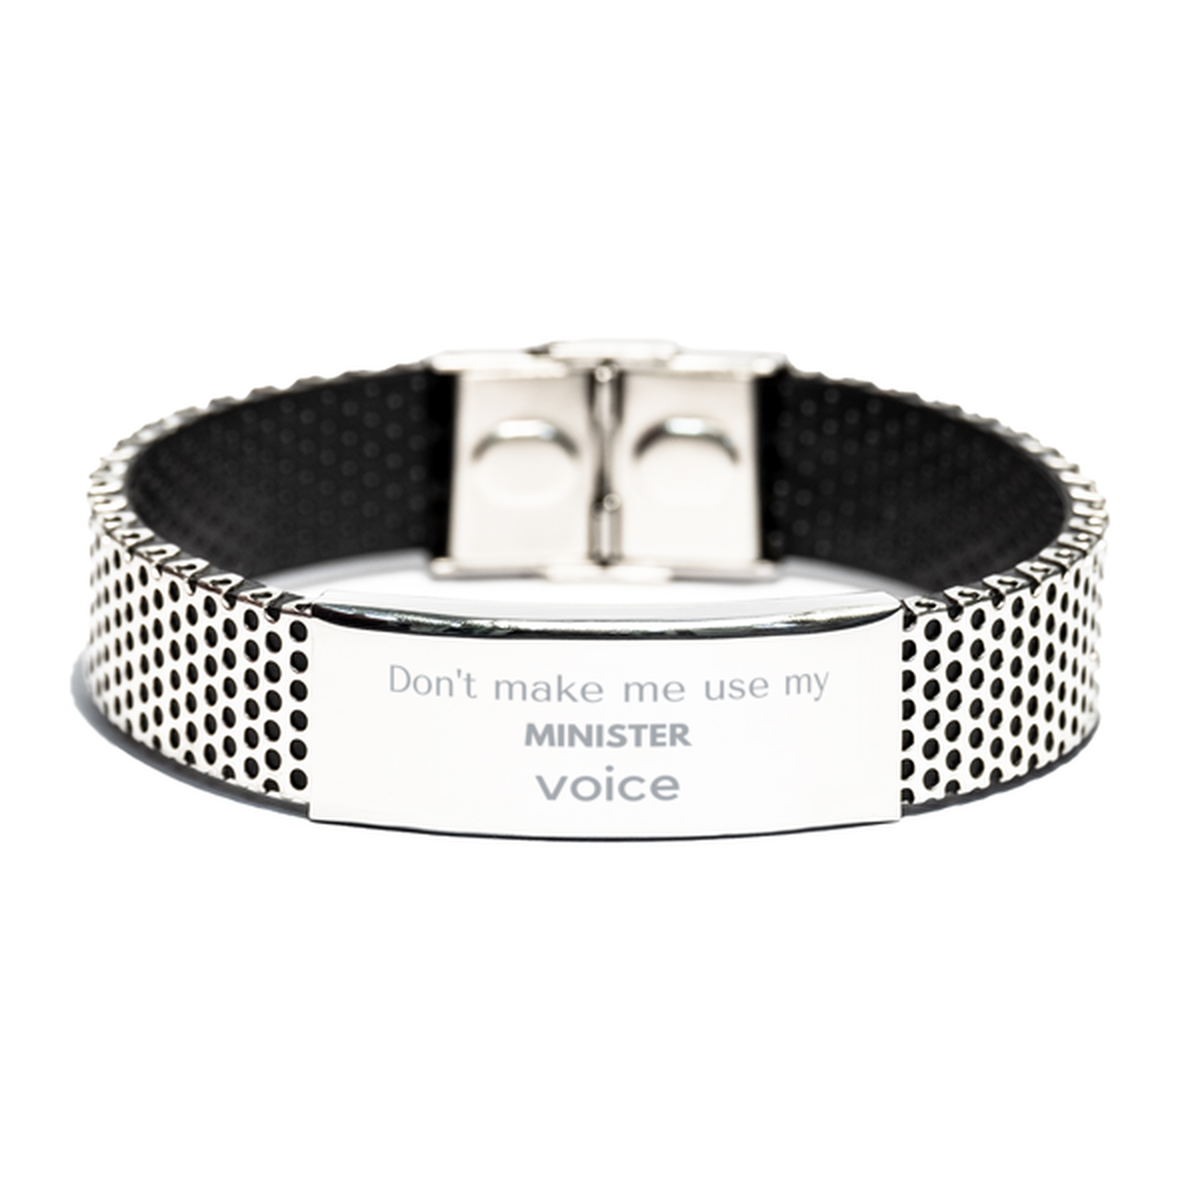 Don't make me use my Minister voice, Sarcasm Minister Gifts, Christmas Minister Stainless Steel Bracelet Birthday Unique Gifts For Minister Coworkers, Men, Women, Colleague, Friends